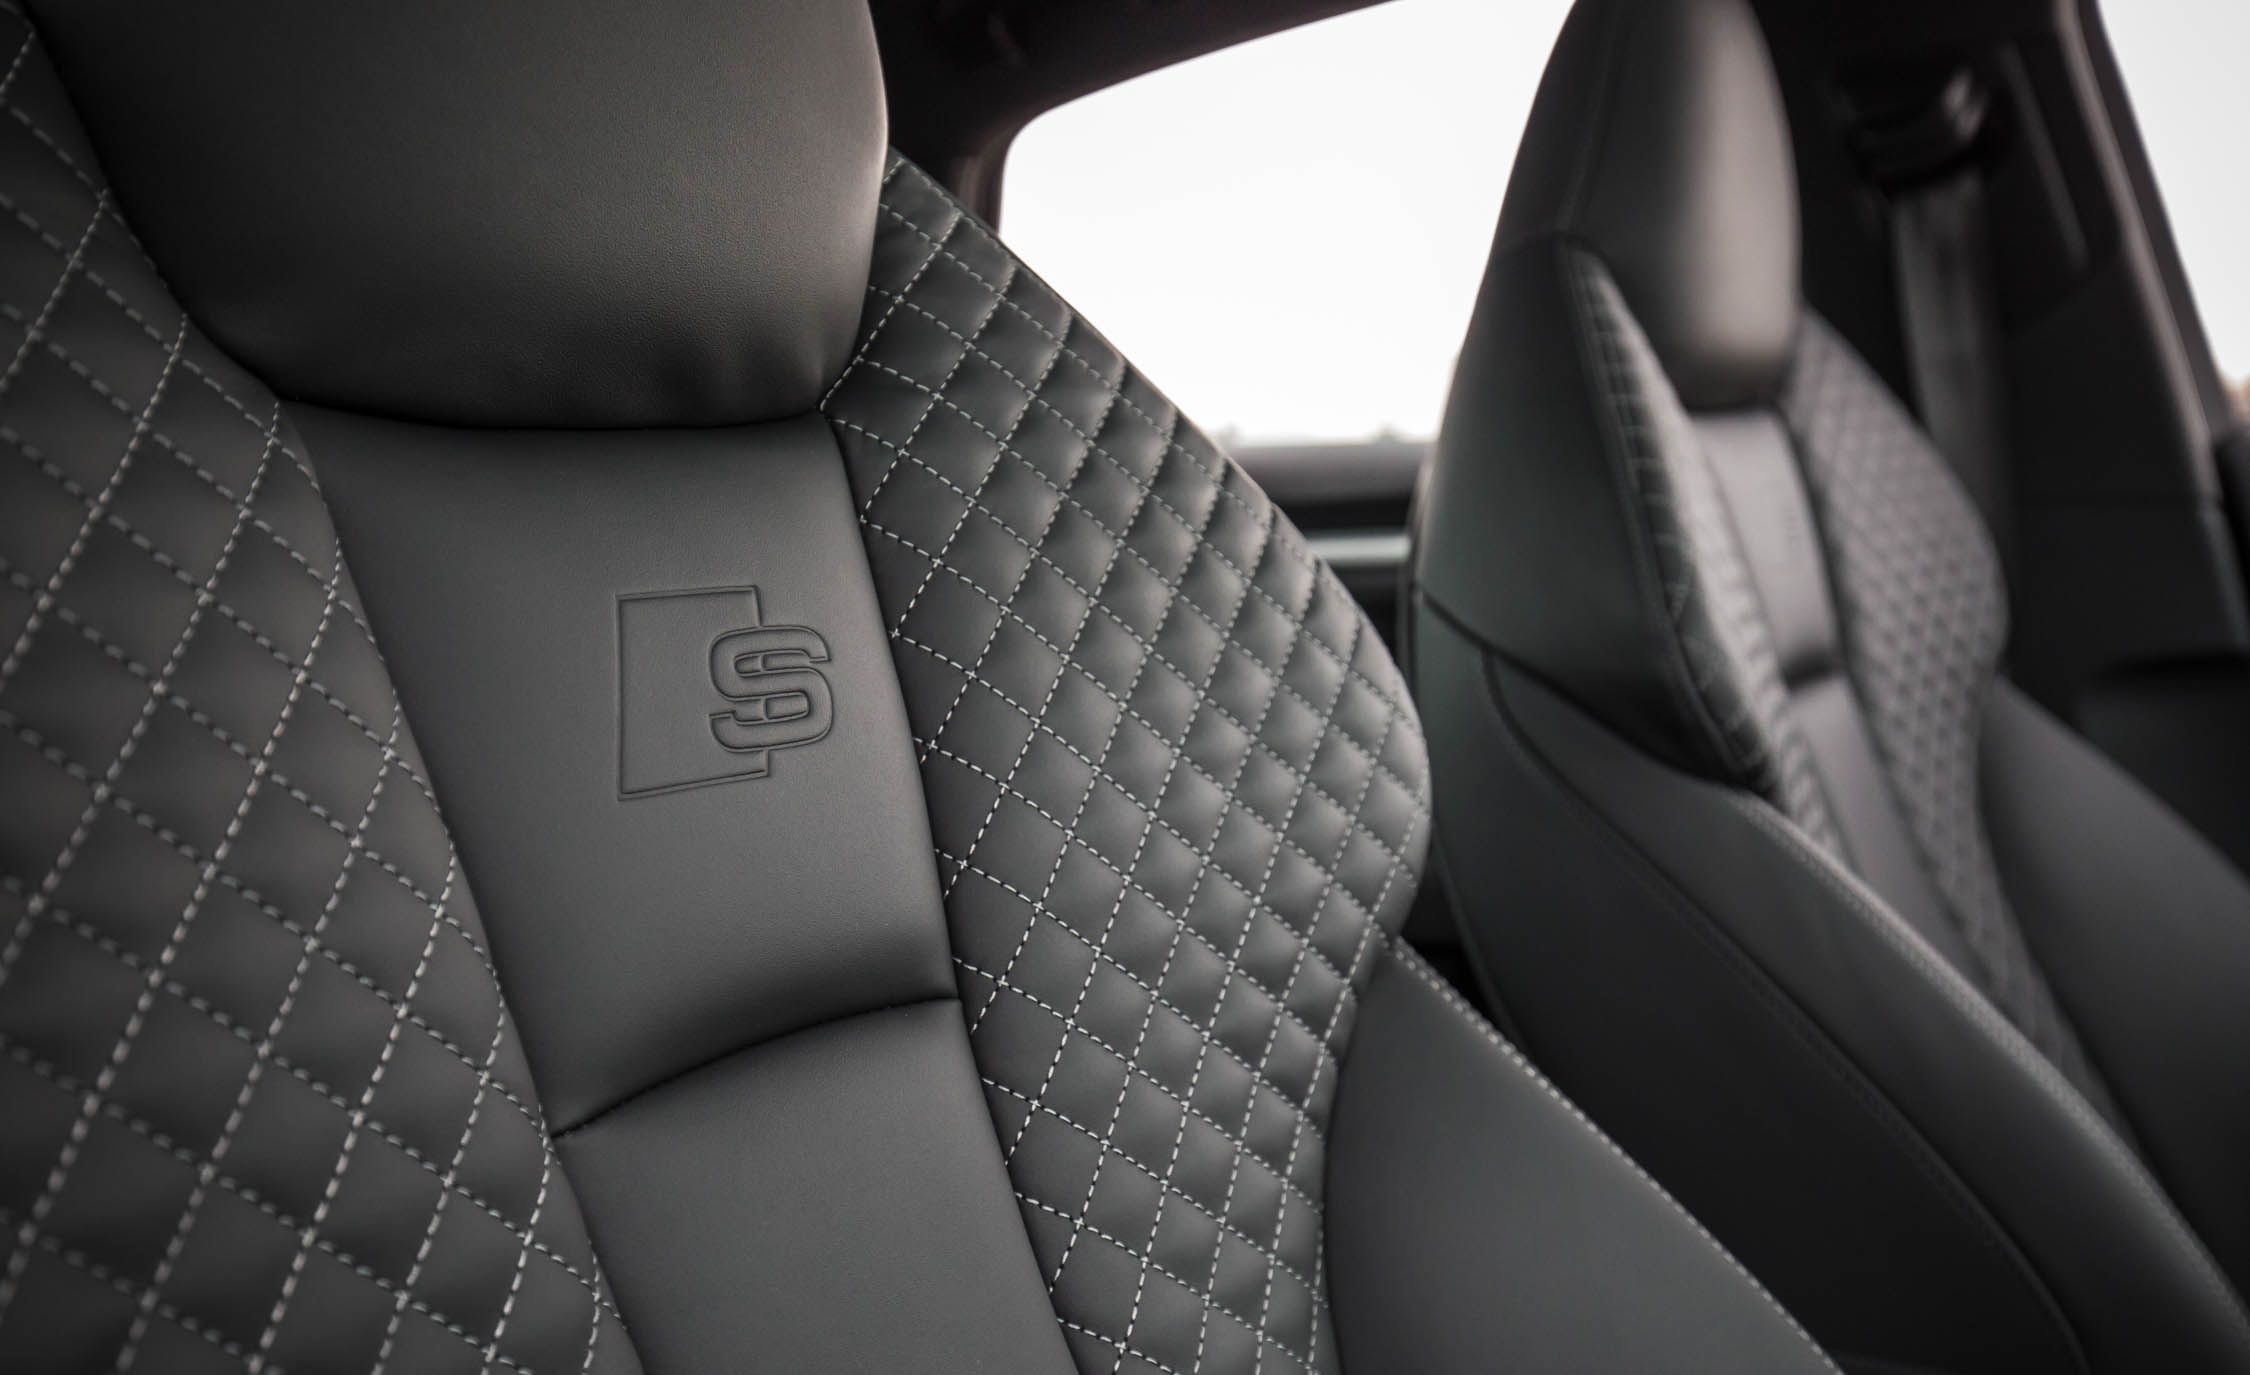 2017 Audi S3 Interior Seats Leather Details (View 34 of 50)